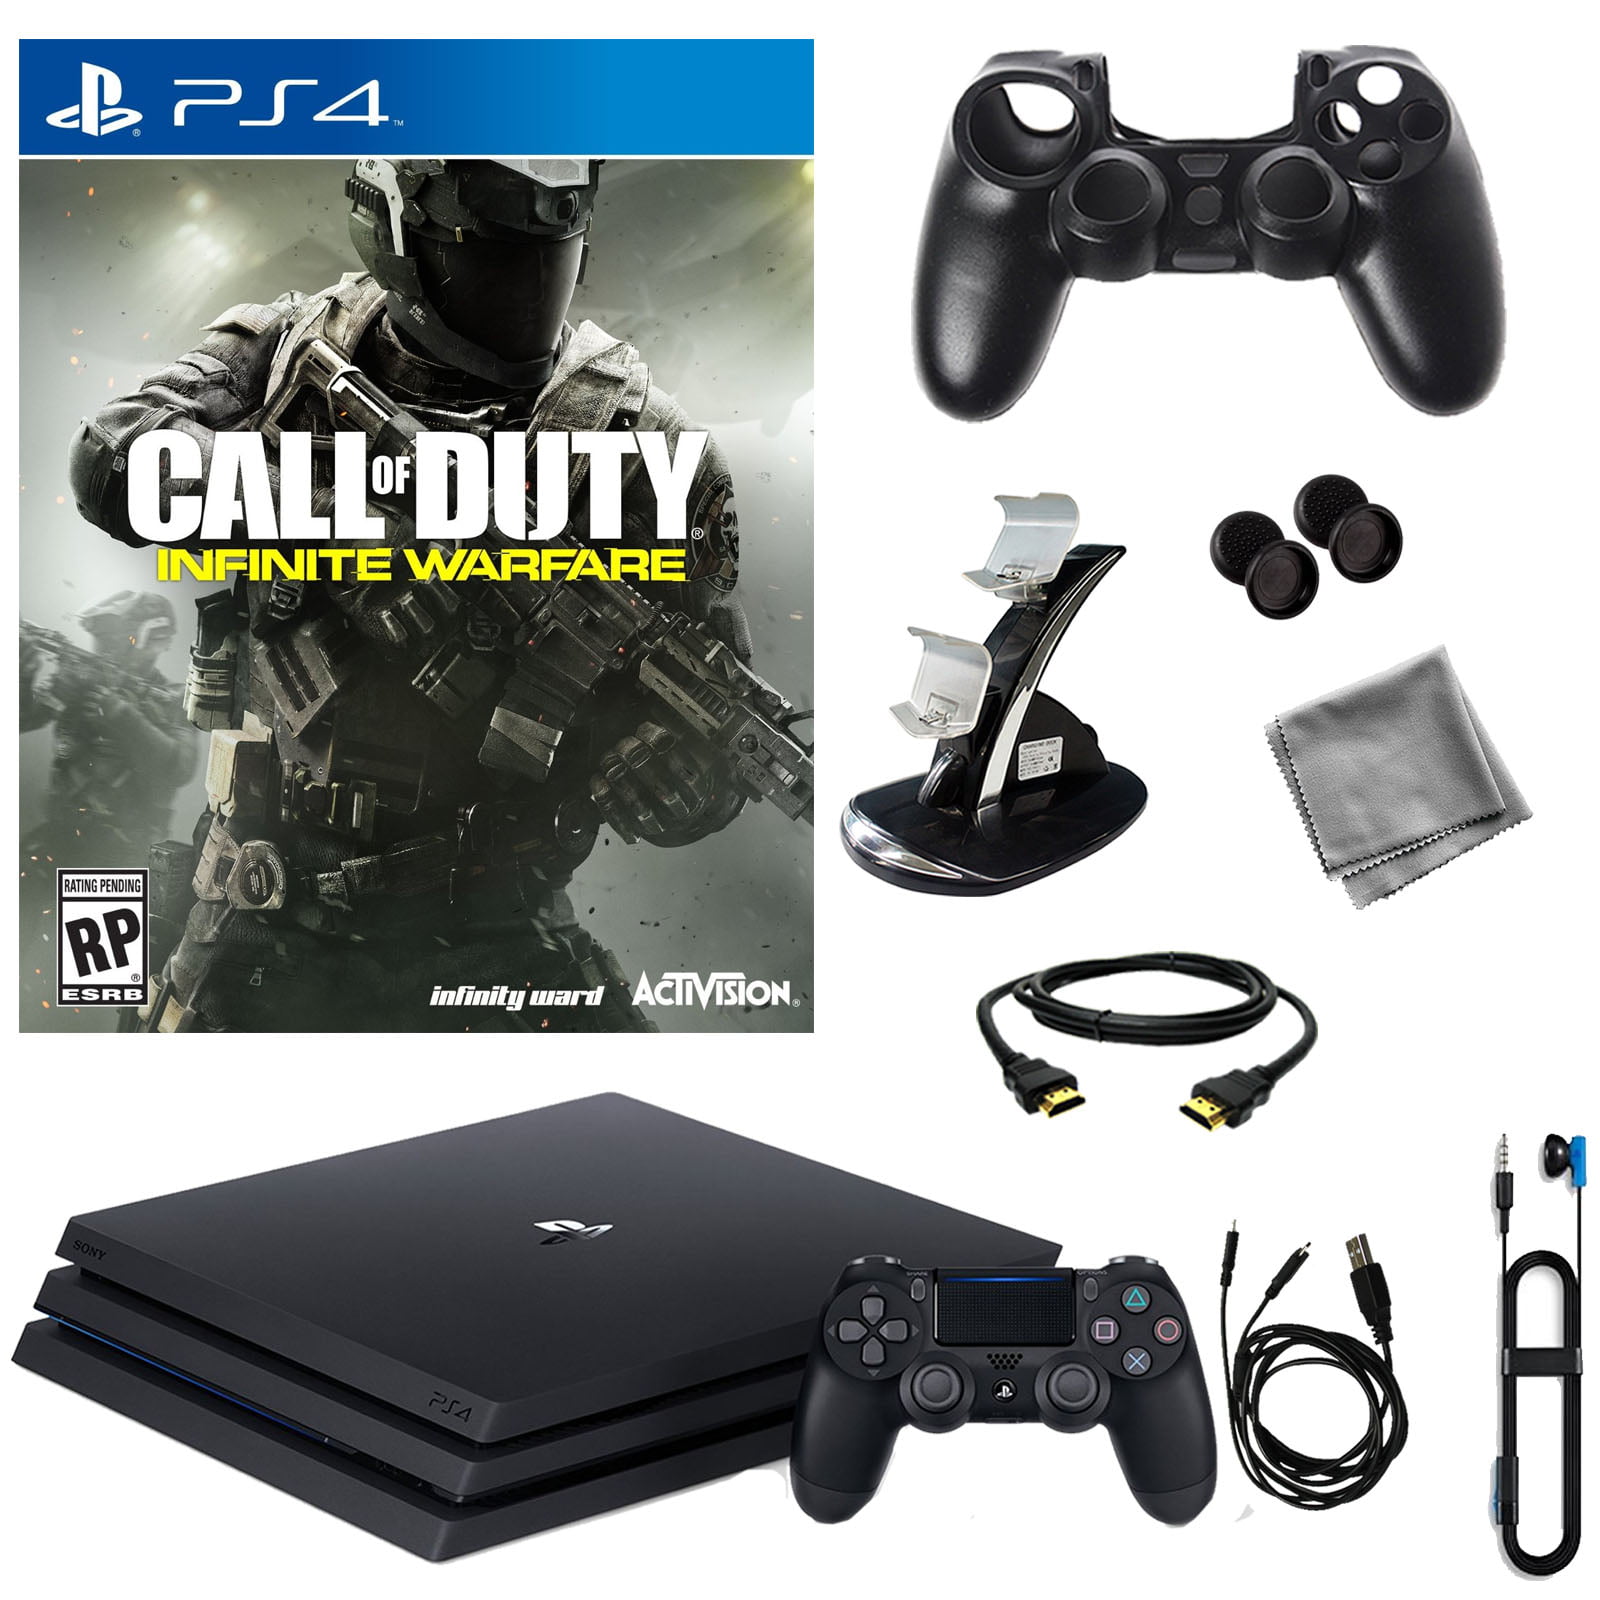 PlayStation 4 Pro 1TB Console With Infinite Warfare & 8 in 1 Kit